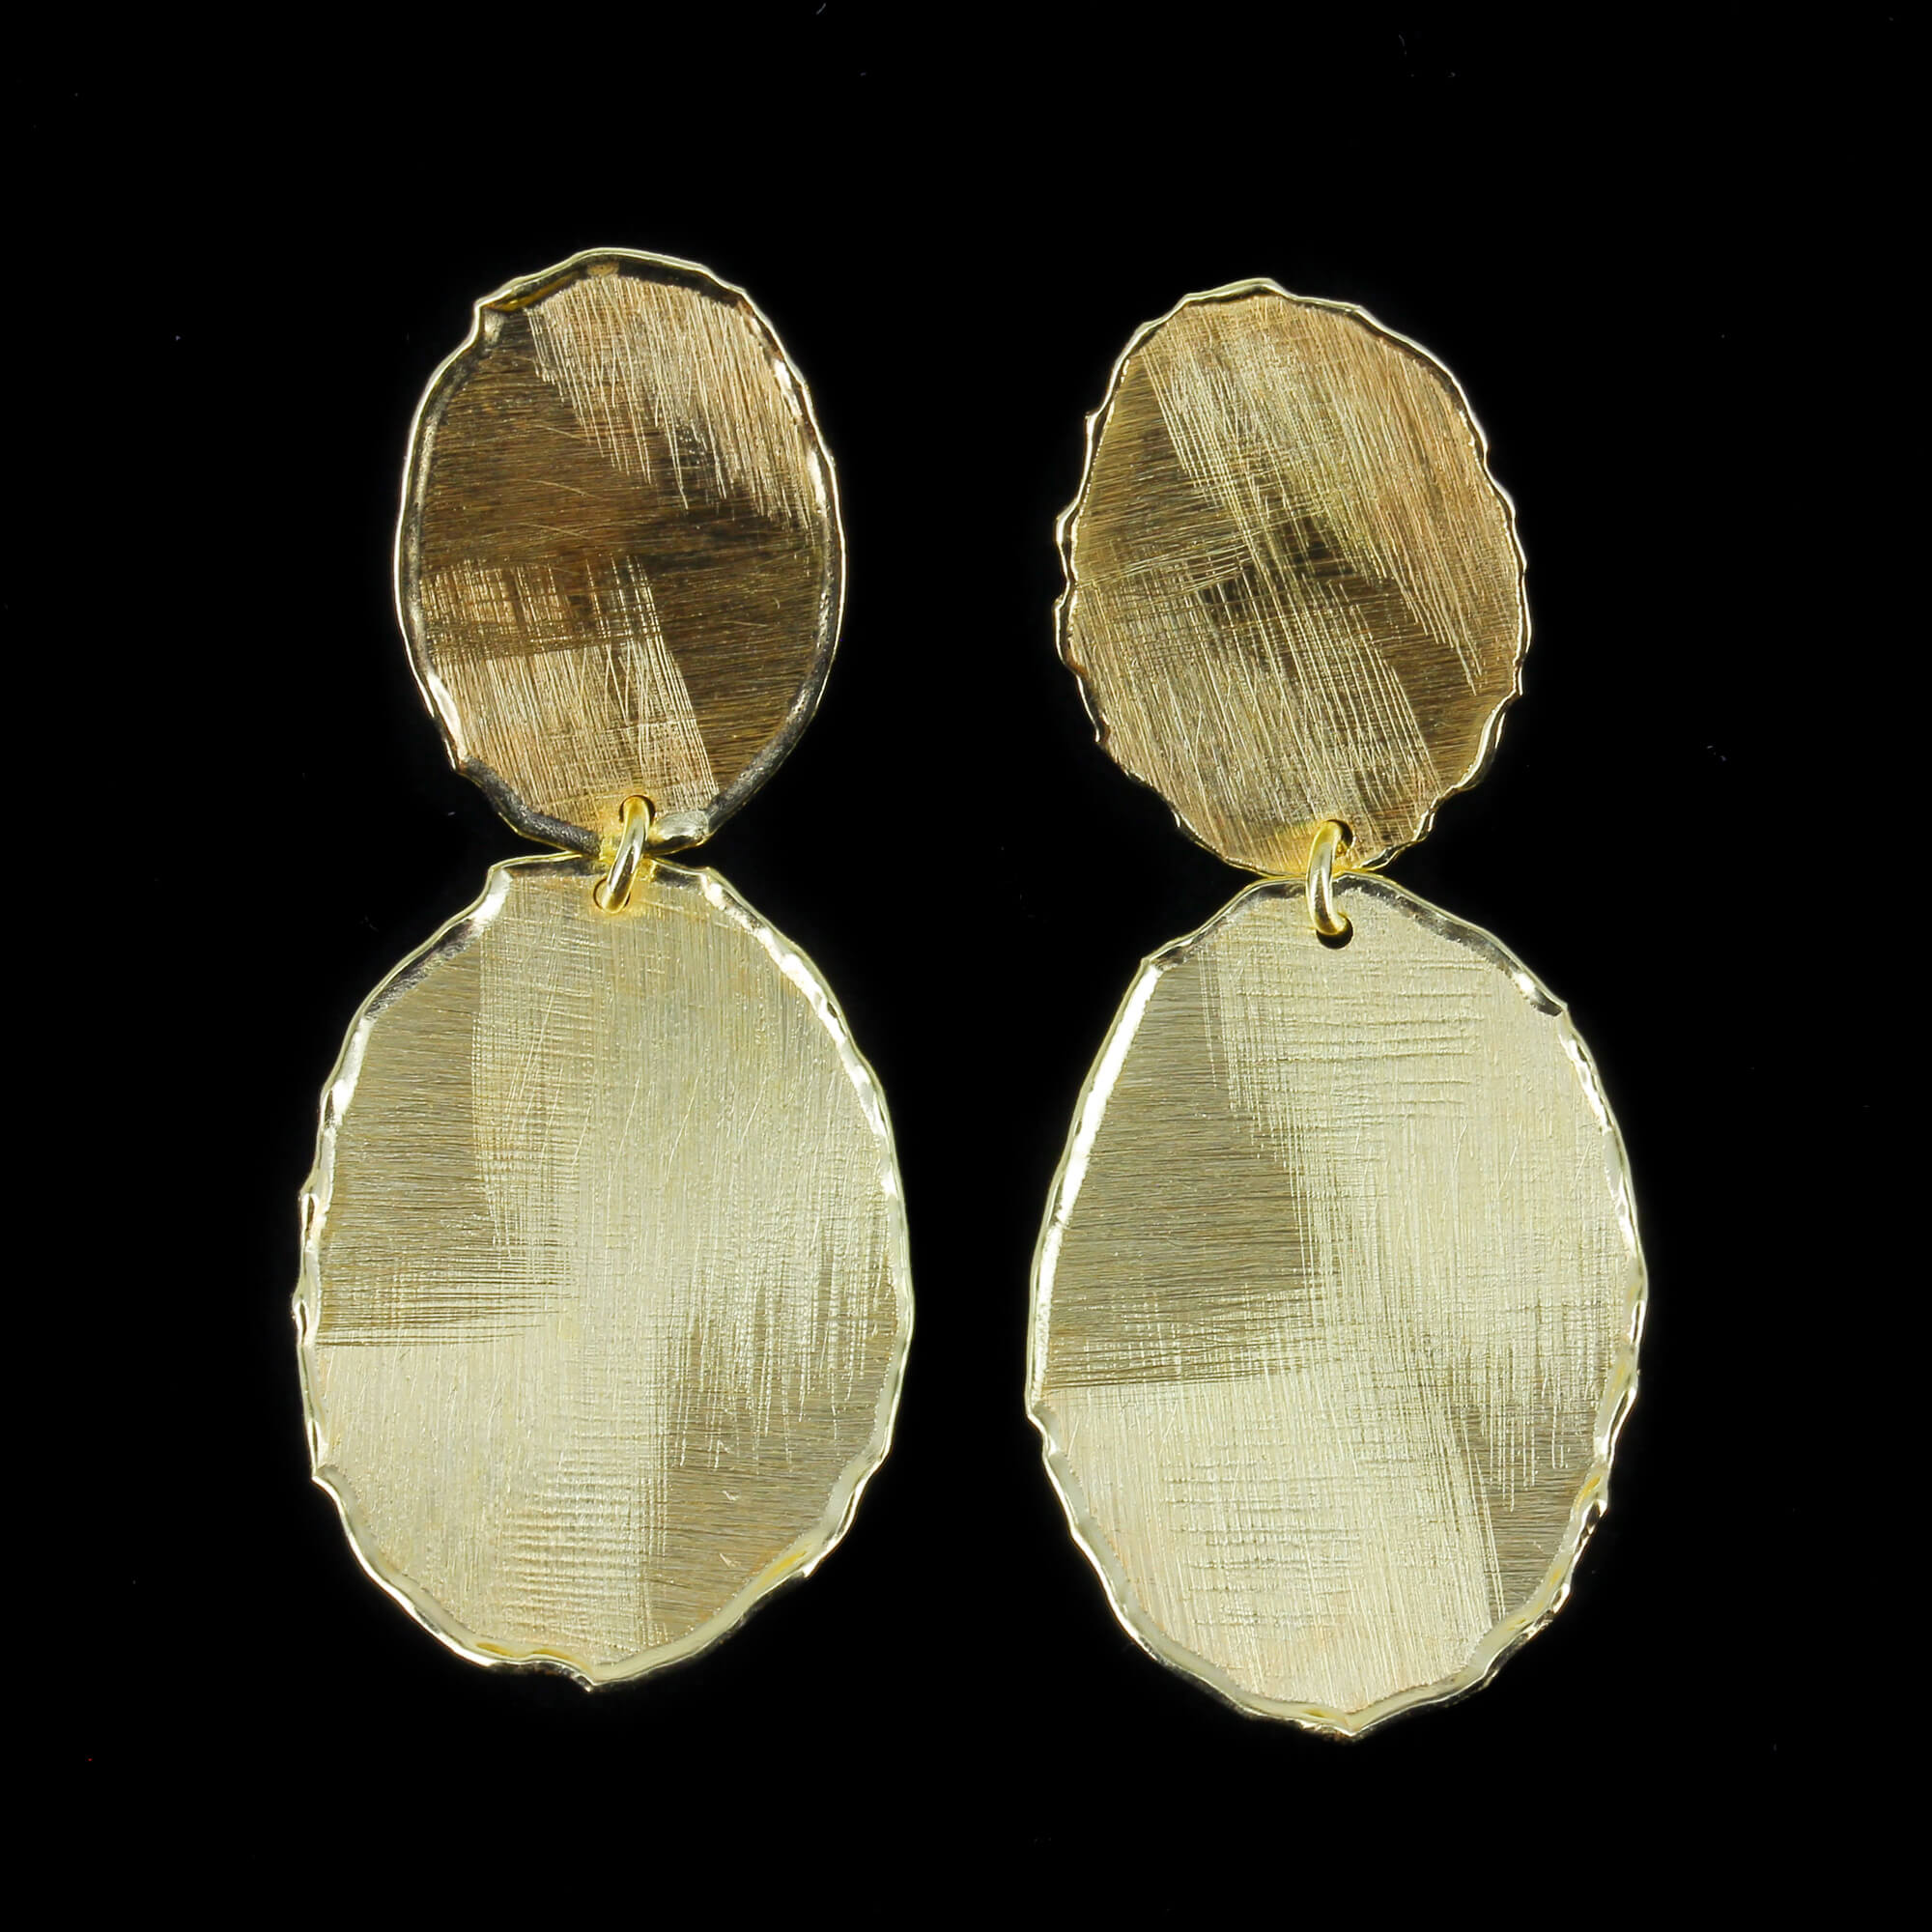 Golden long and oval earrings of 18kt gold